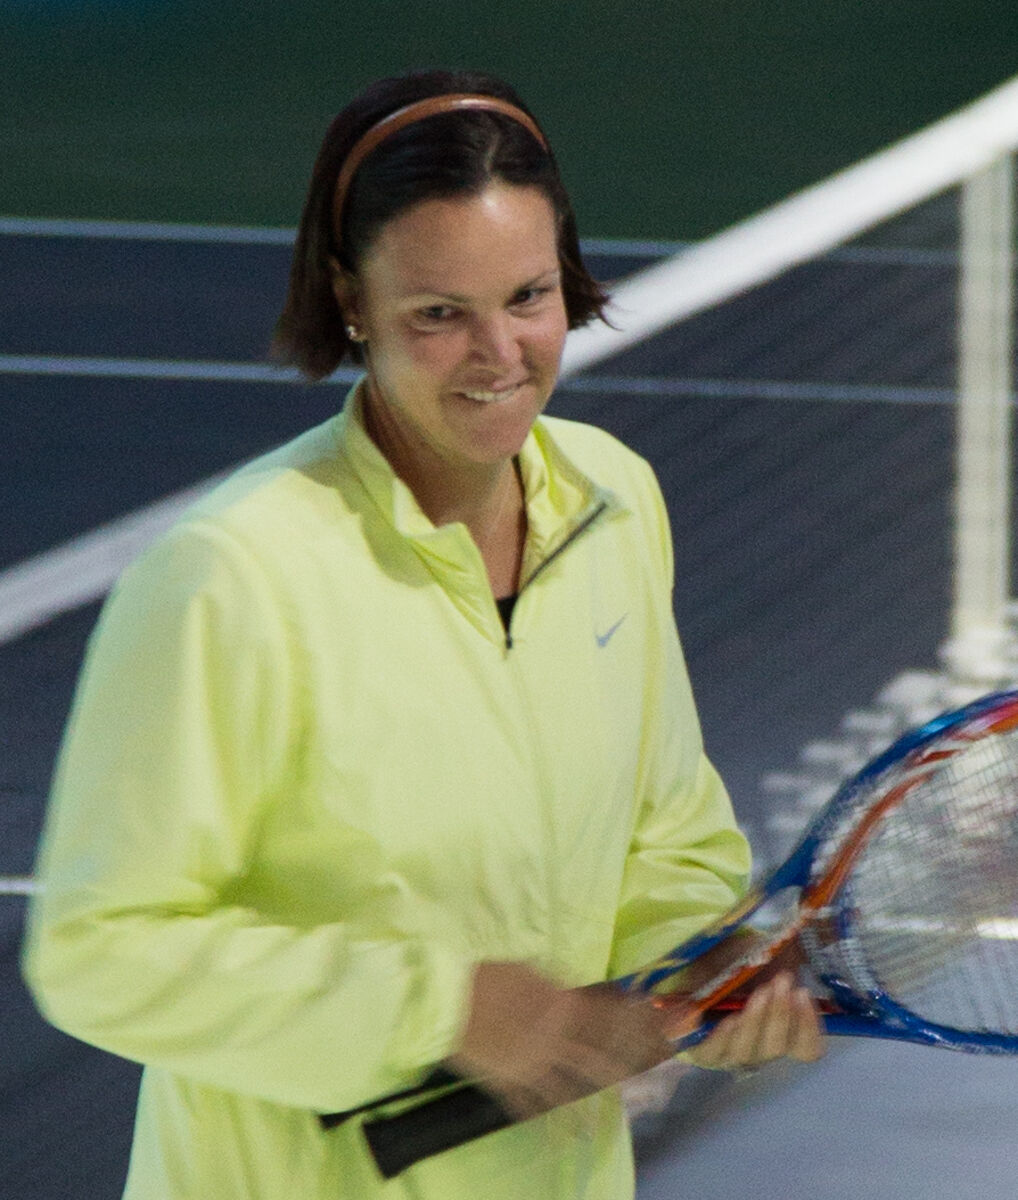 Lindsay Davenport net worth in Sports & Athletes category